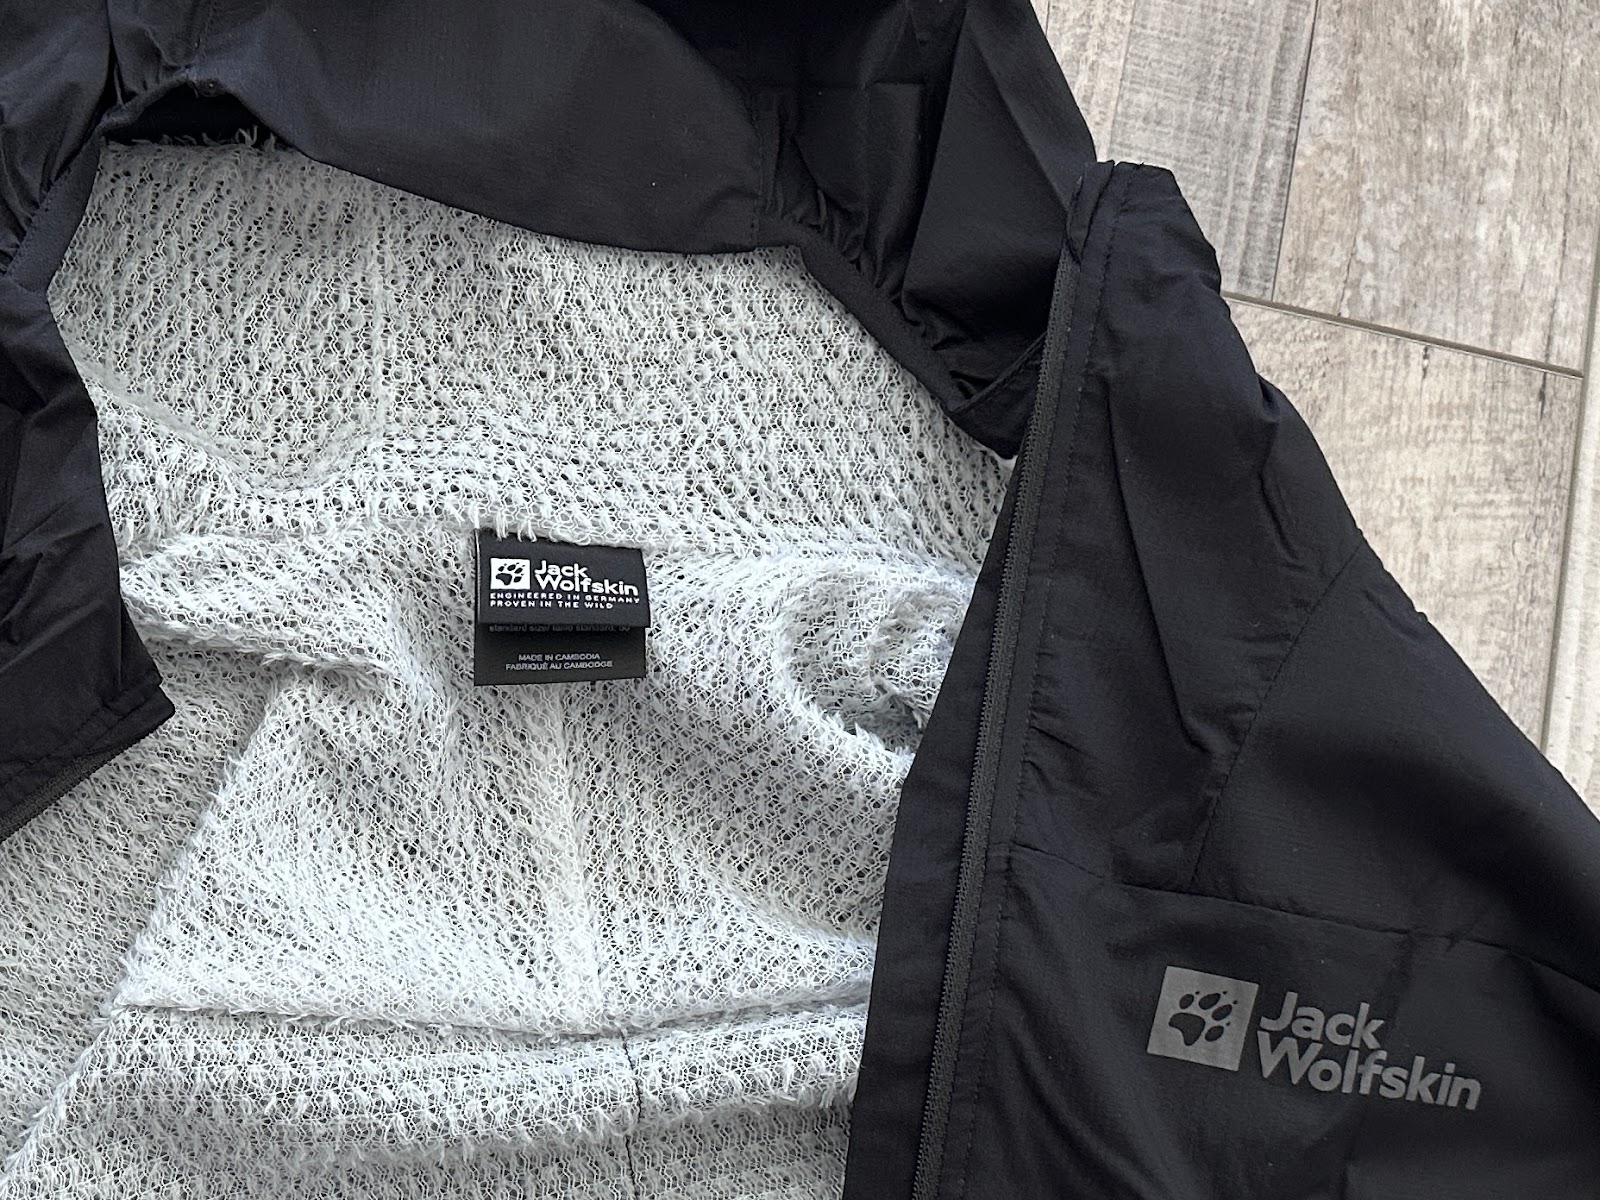 Road Trail Run: Jack Wolfskin Pre Light Alpha Jacket Women's and Men's  Jacket Reviews: Ultralight Insulation and Wind Protection